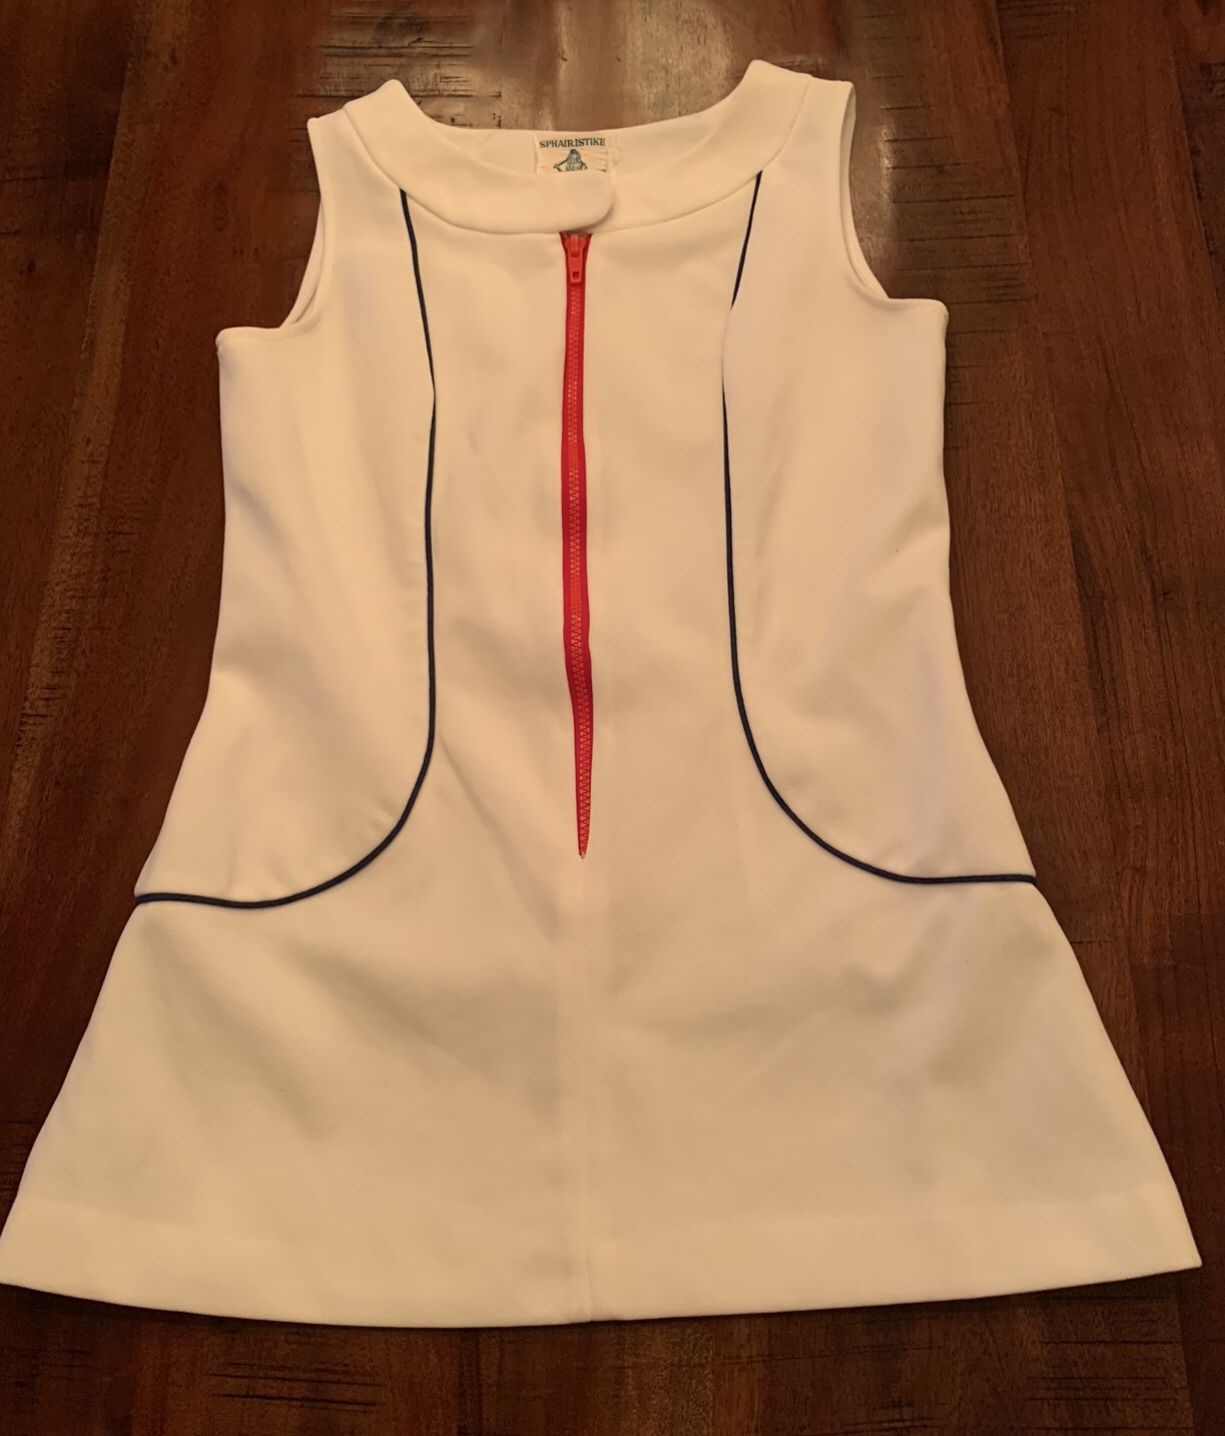 SPHAIR ISTIKE(first Name In Tennis) Vintage White Dress. 7/8